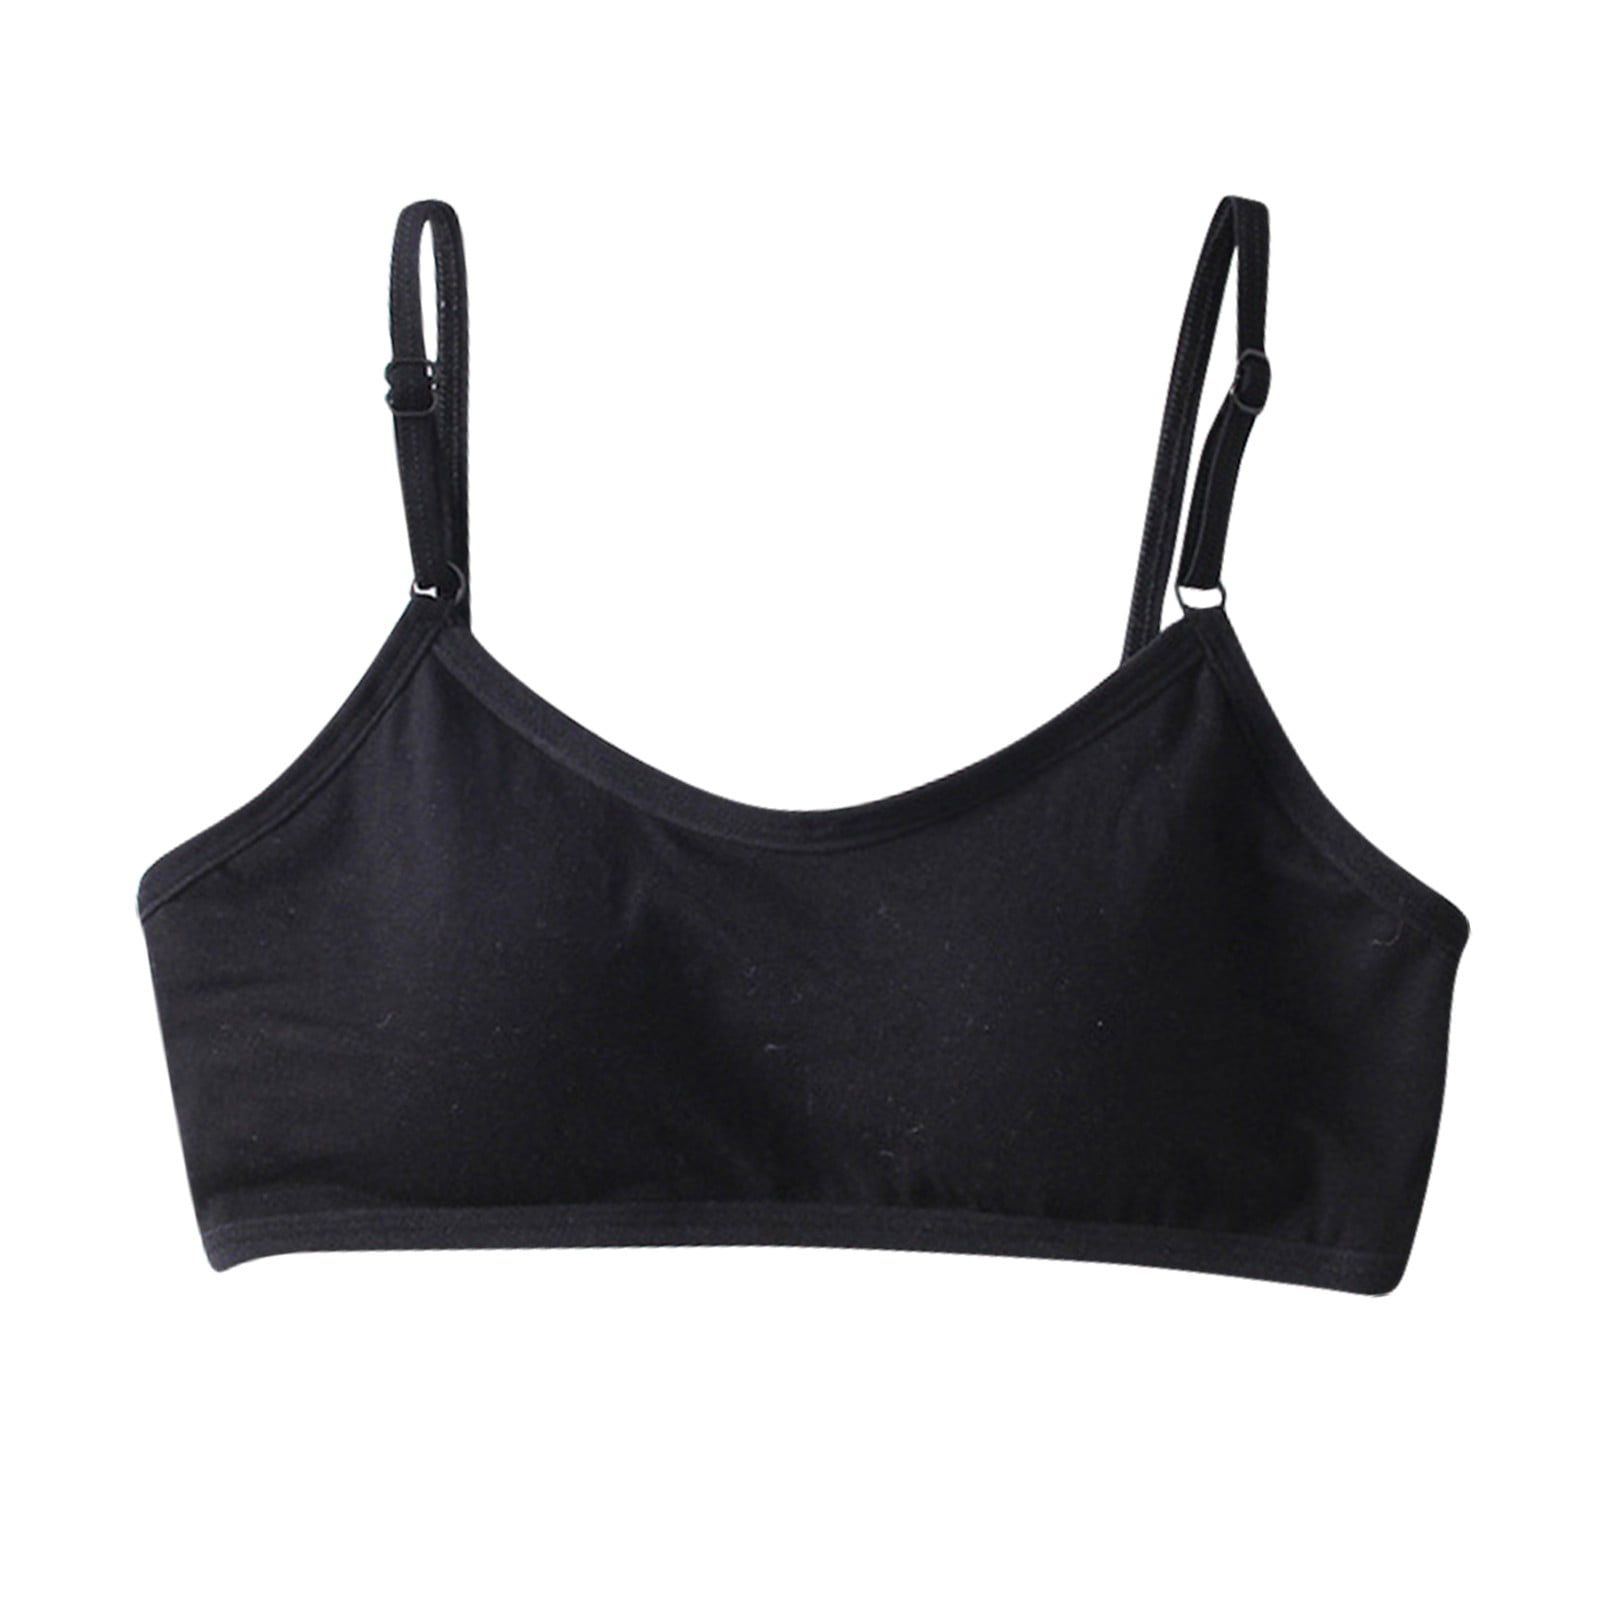 Forestyashe Tube Tops Big Girls Student Training Bras Wireless Light Padded  Sports Cropped Cami Bras for Teens Underwear Adjustable Bra Vest Teenager  Underclothes 